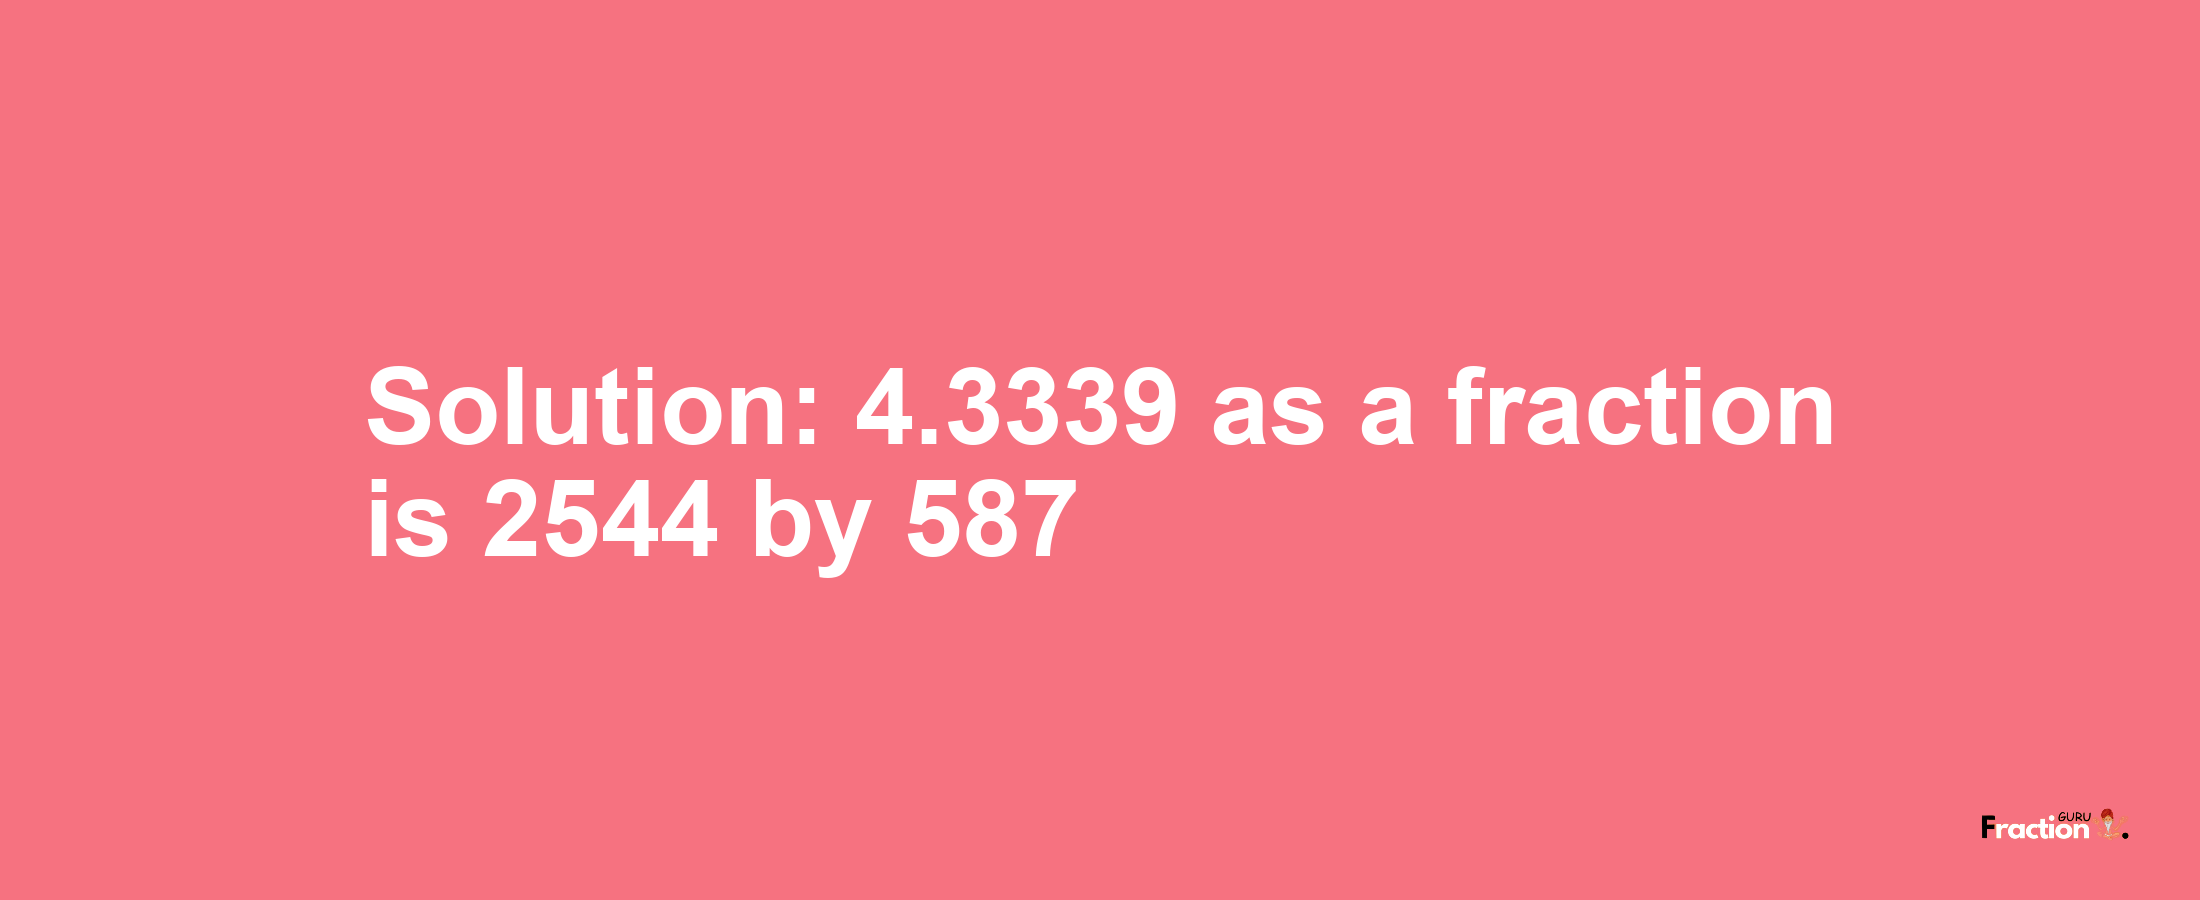 Solution:4.3339 as a fraction is 2544/587